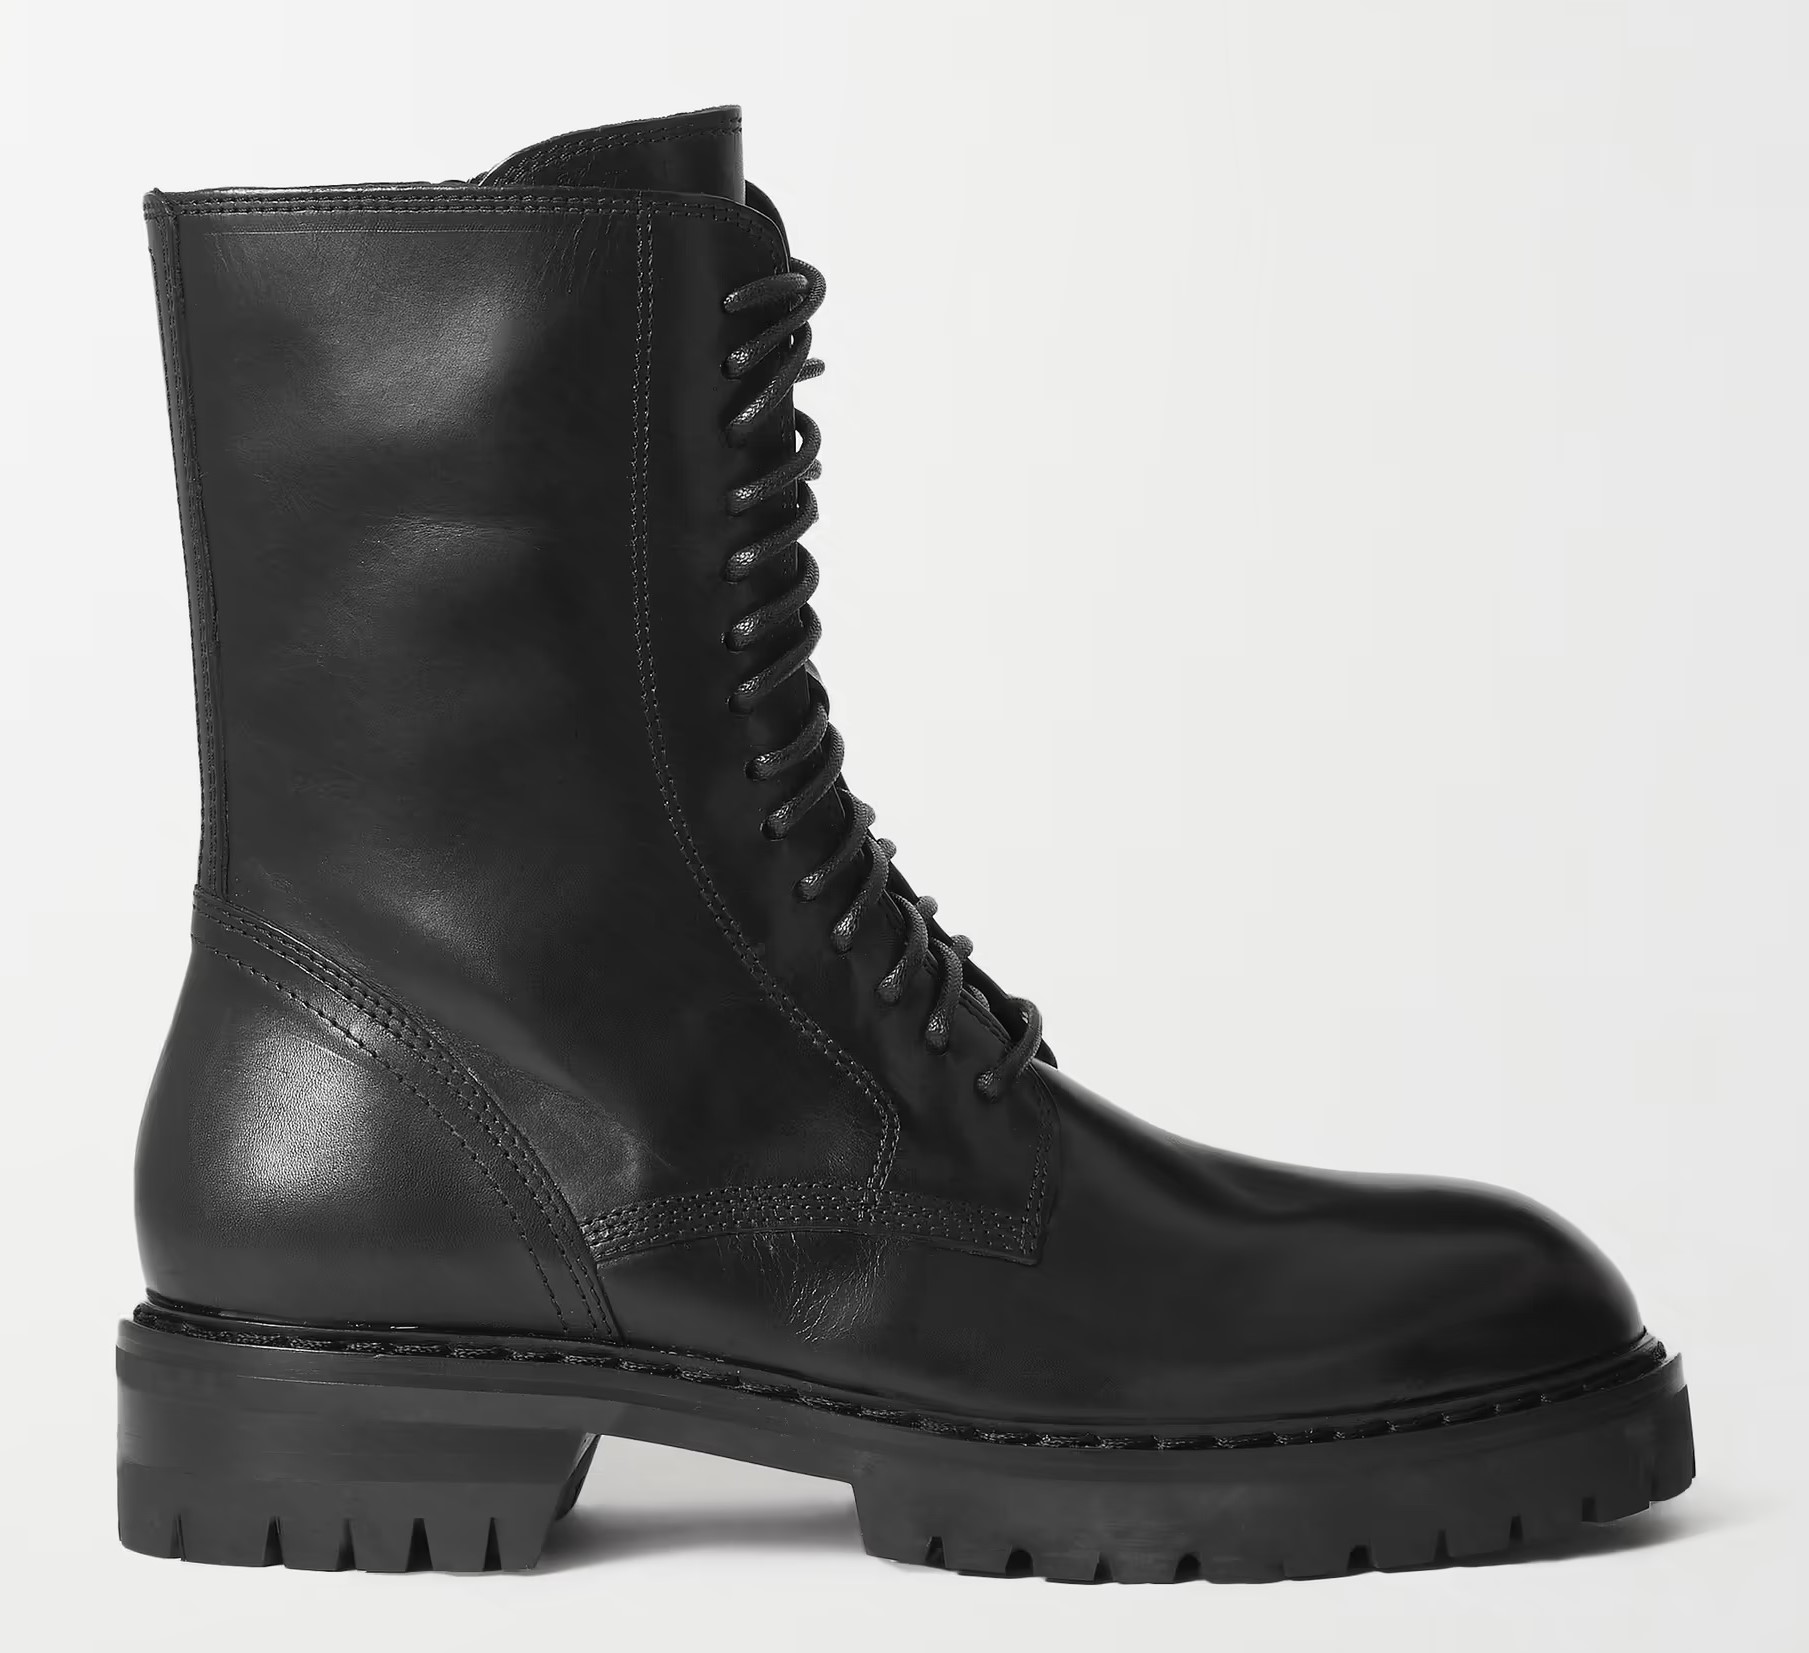 ANN DEMEULEMEESTER Alec Leather Ankle Boots